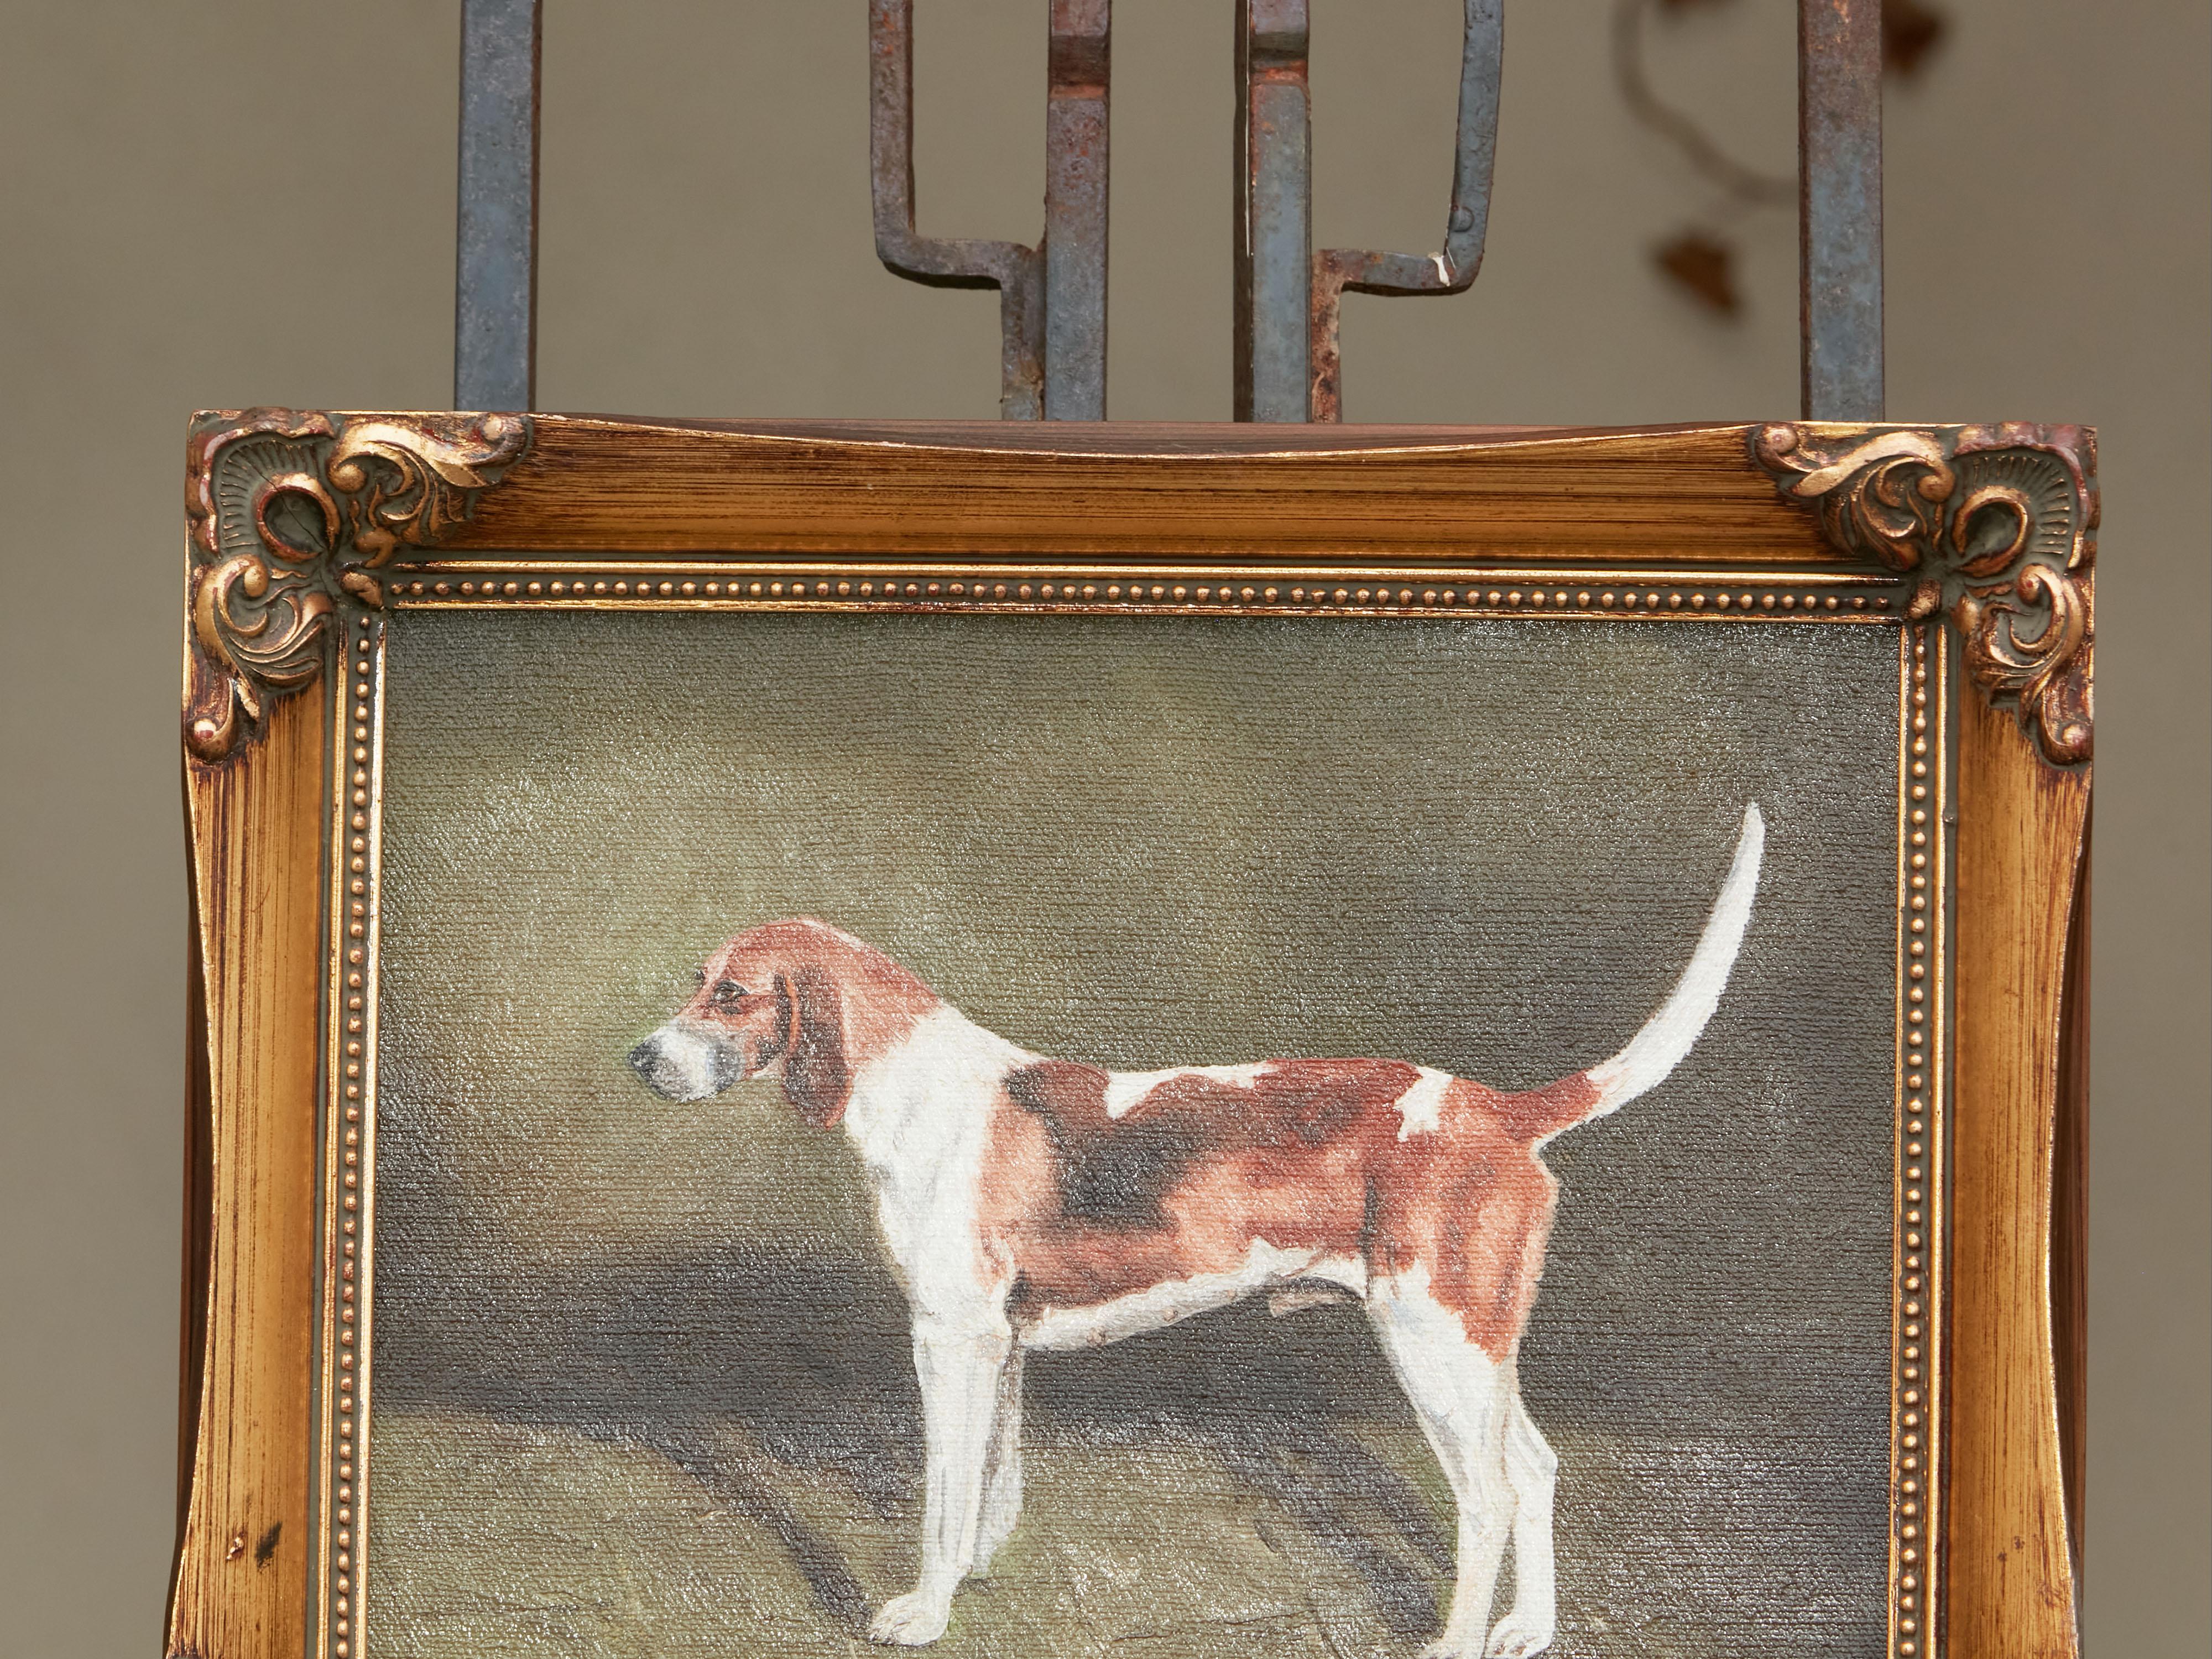 Carved Oil on Canvas Dog Painting Depicting a Belvoir Hound, Signed Jacqueline Decker